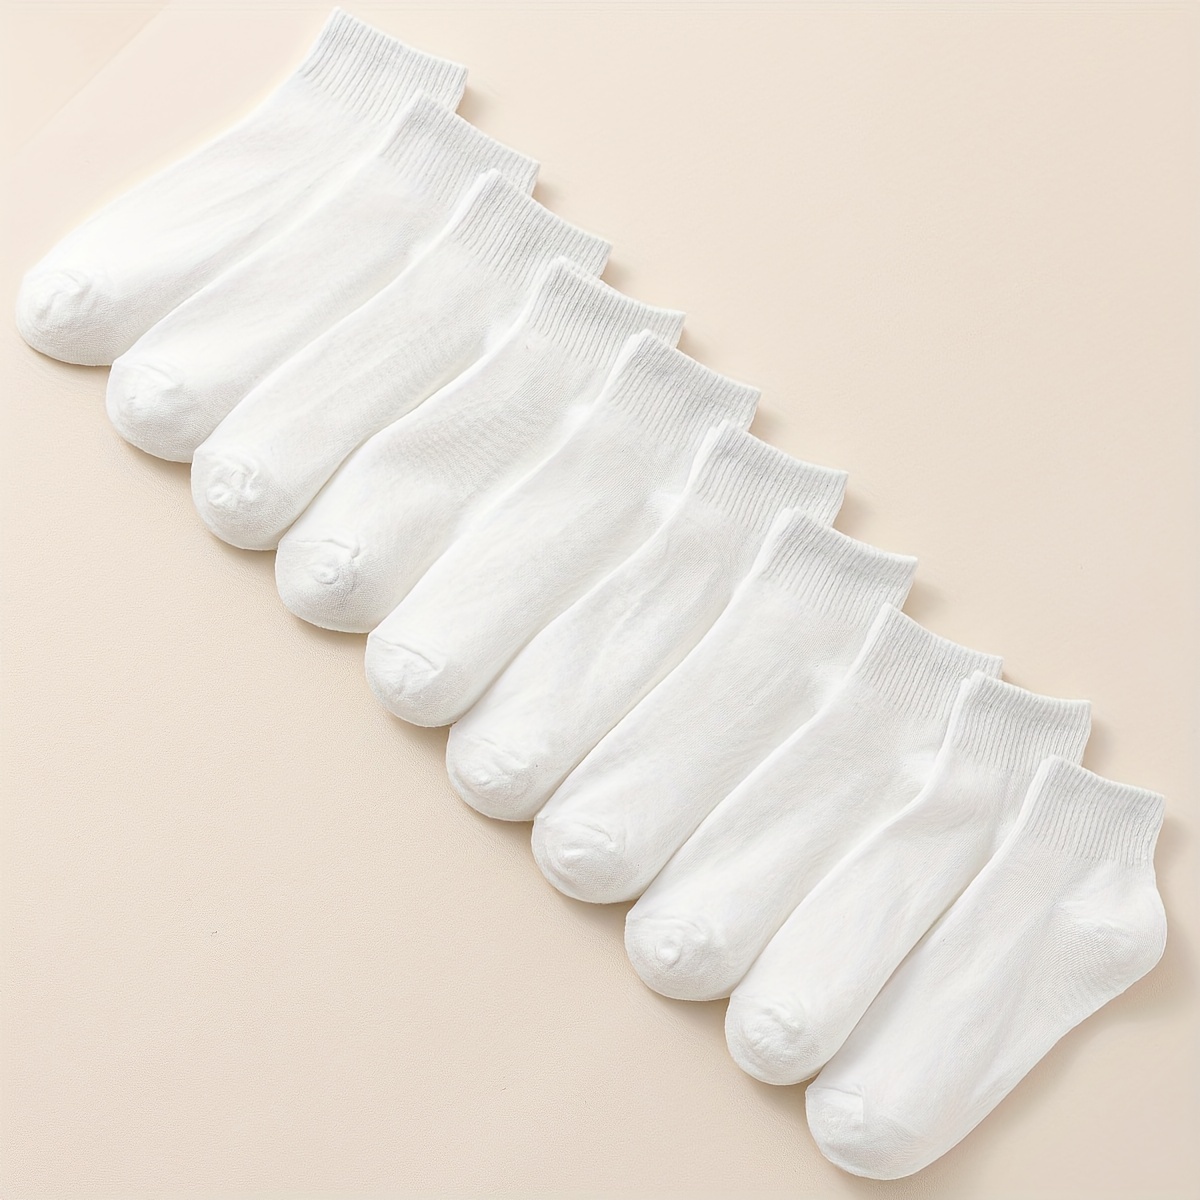 

10 Pairs Simple Solid Socks, Comfy & Breathable All-match Socks, Women's Stockings & Hosiery